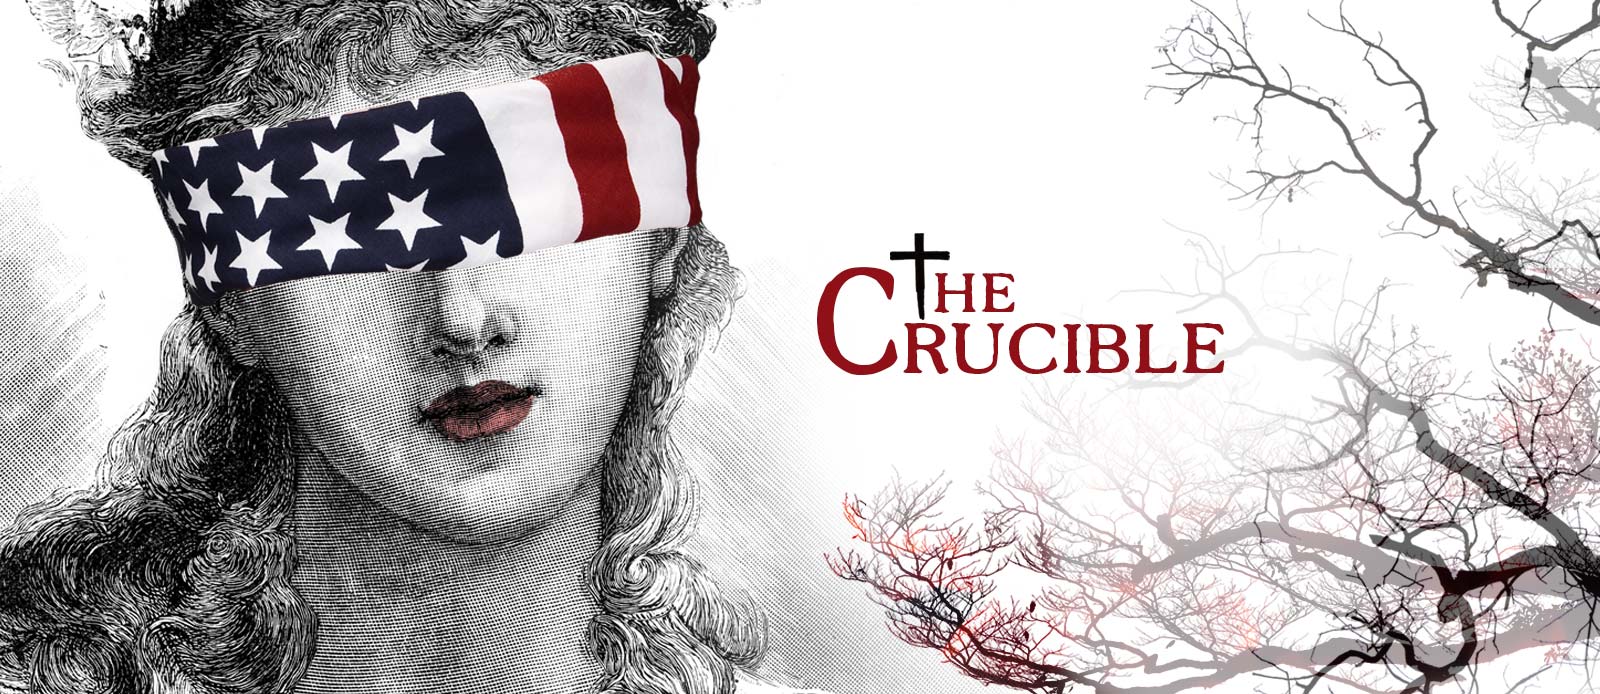 Gripping 'Crucible' stirs strong emotions at Asolo Rep